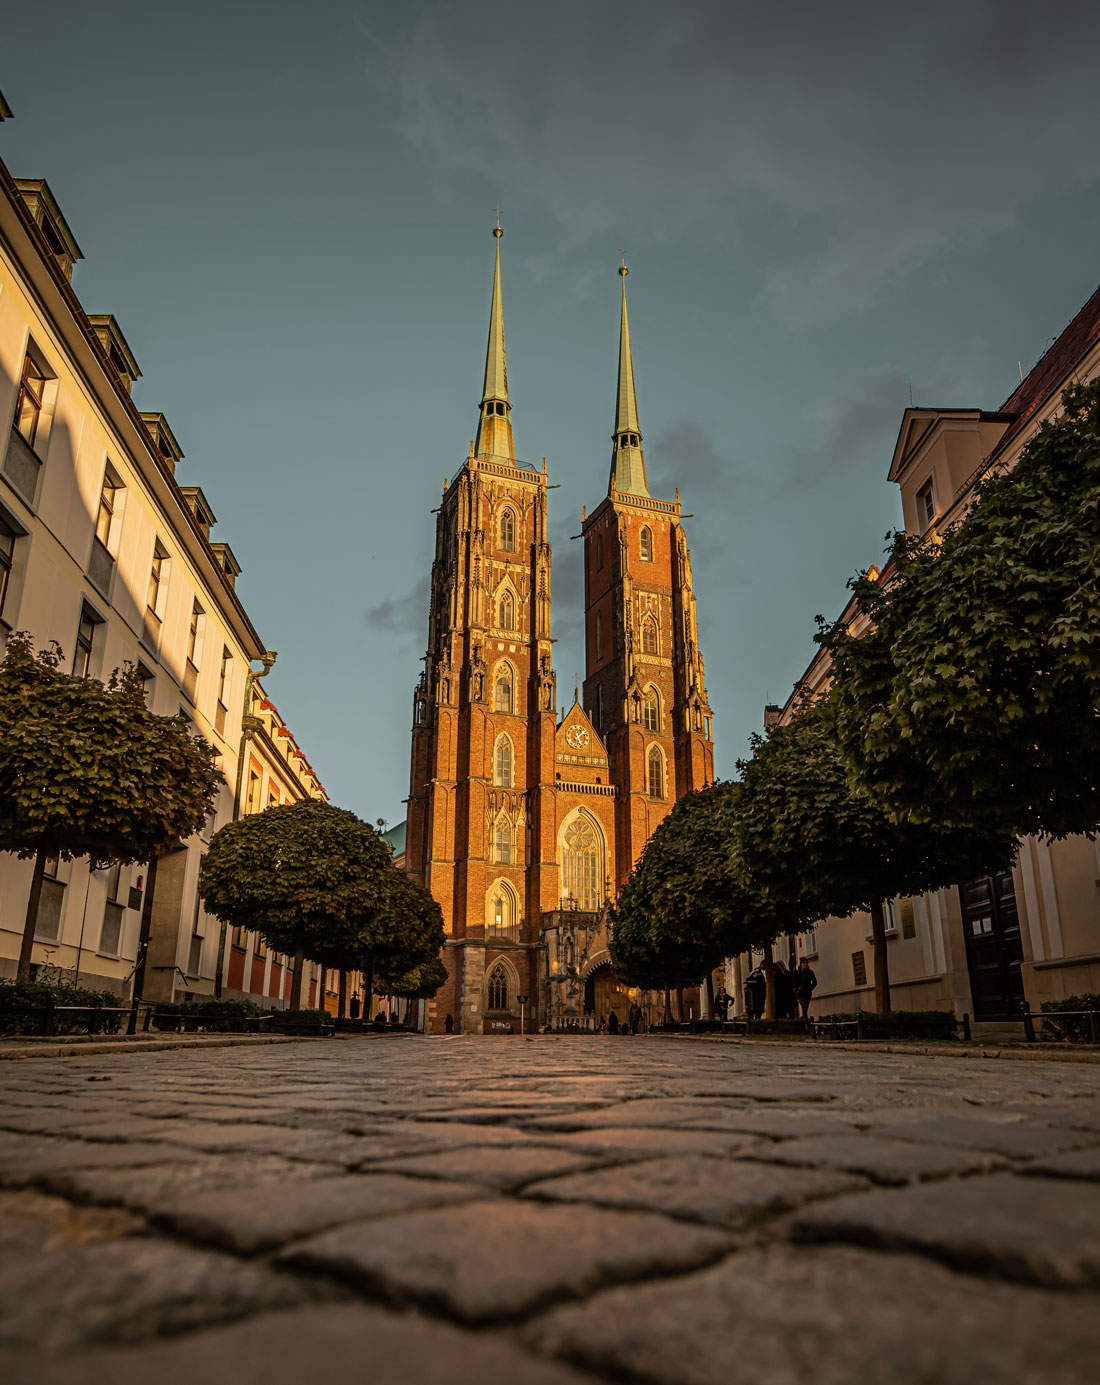 Cathedral of St. John the Baptist things-to-do-in-wroclaw-poland-kelseyinlondon-kelsey-heinrichs-uk-travel-blogger-Wrocław-travel-guide